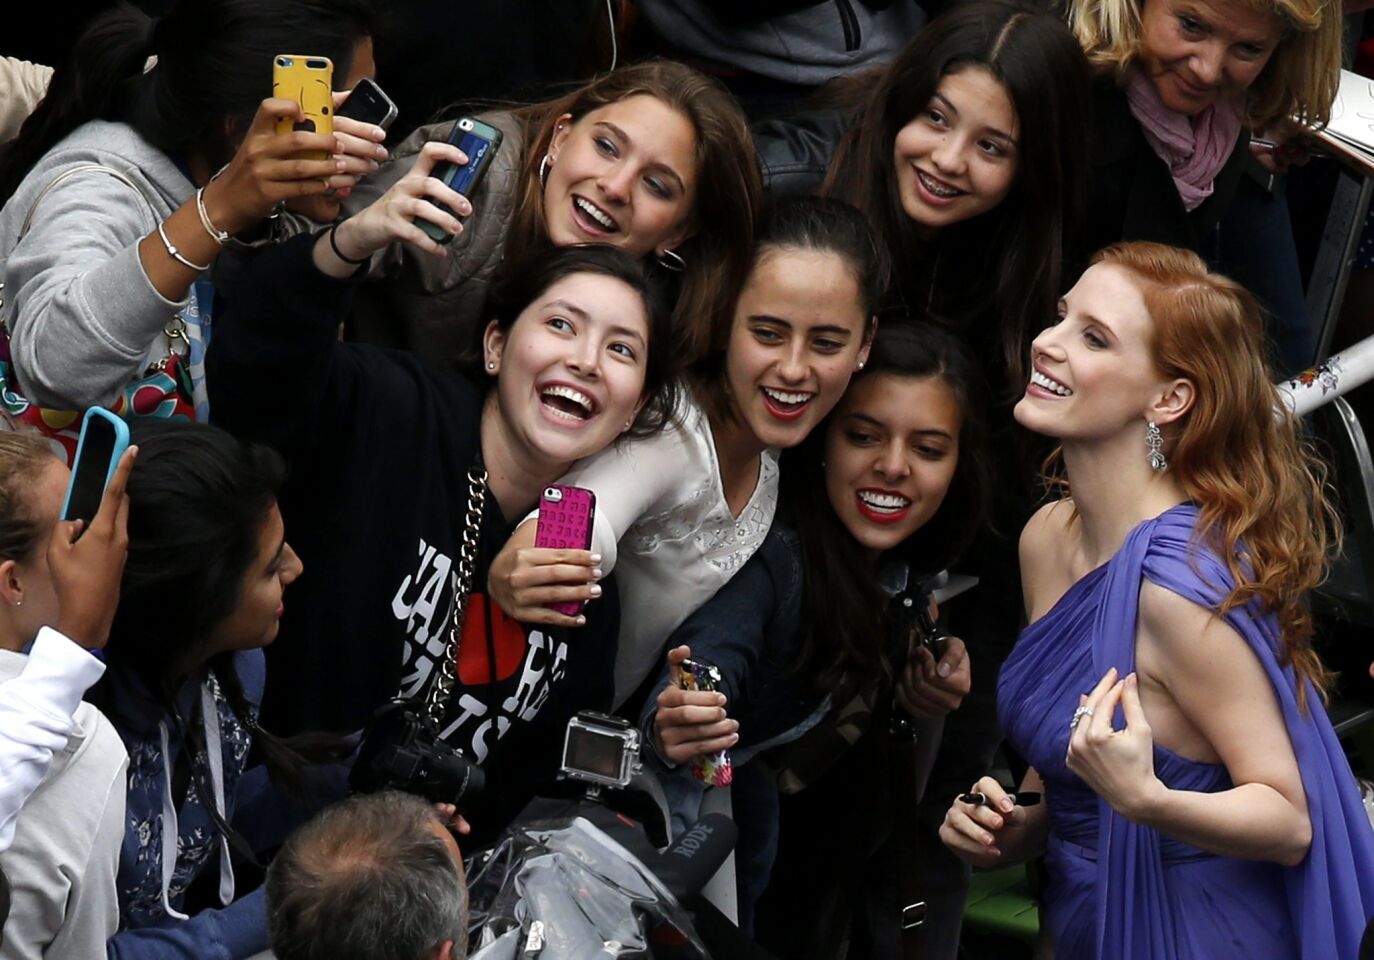 Jessica Chastain, right, poses with fans as she arrives for the screening of "Foxcatcher" during the 67th annual Cannes Film Festival in Cannes, France, on May 19, 2014.